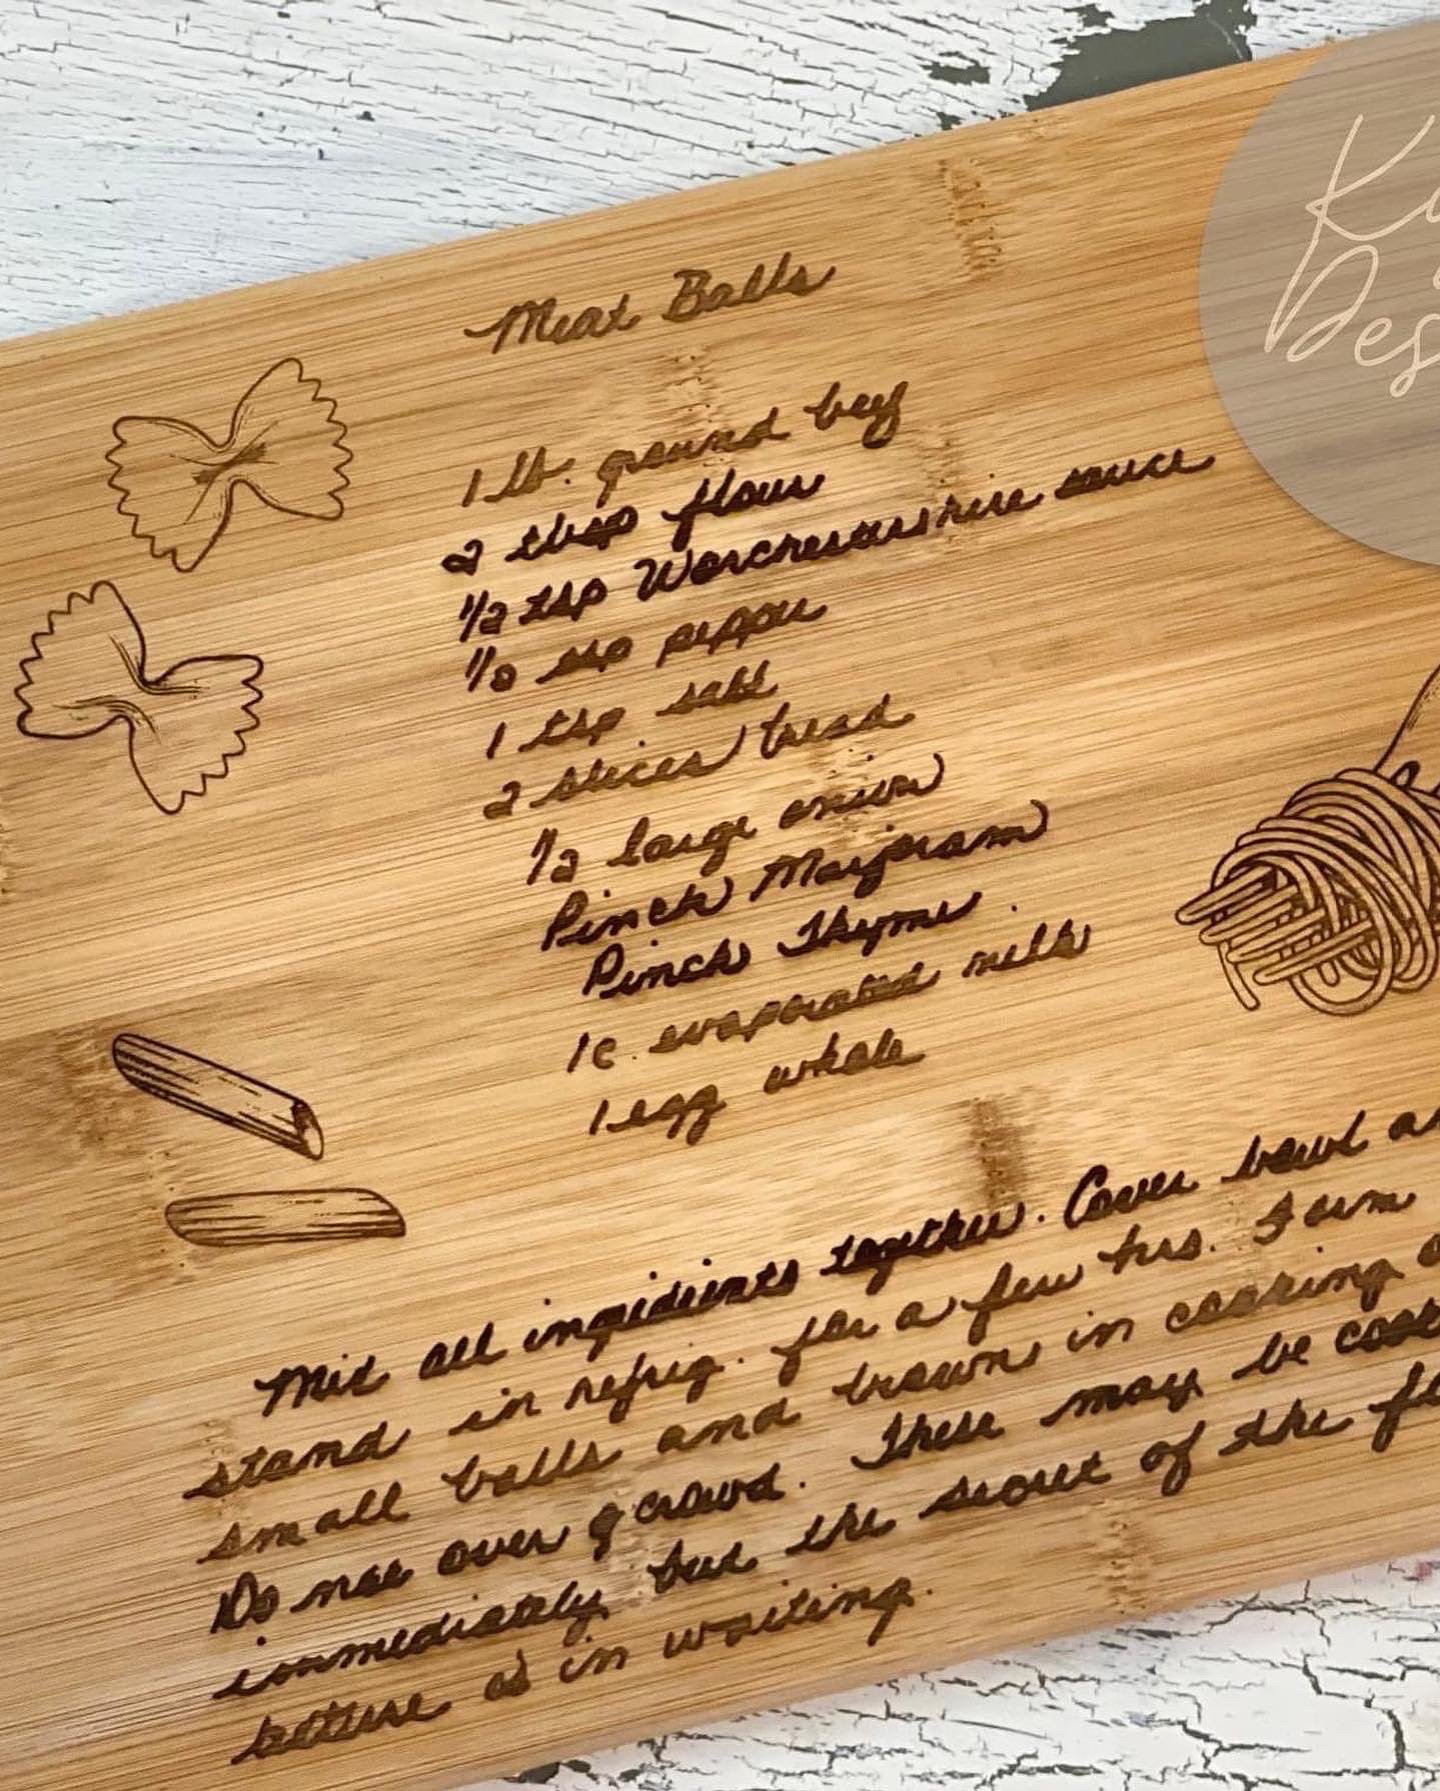 NO PROMO CODES!!!  SPECIAL HOLIDAY PRICE! Personalized Custom Recipe Cutting Board